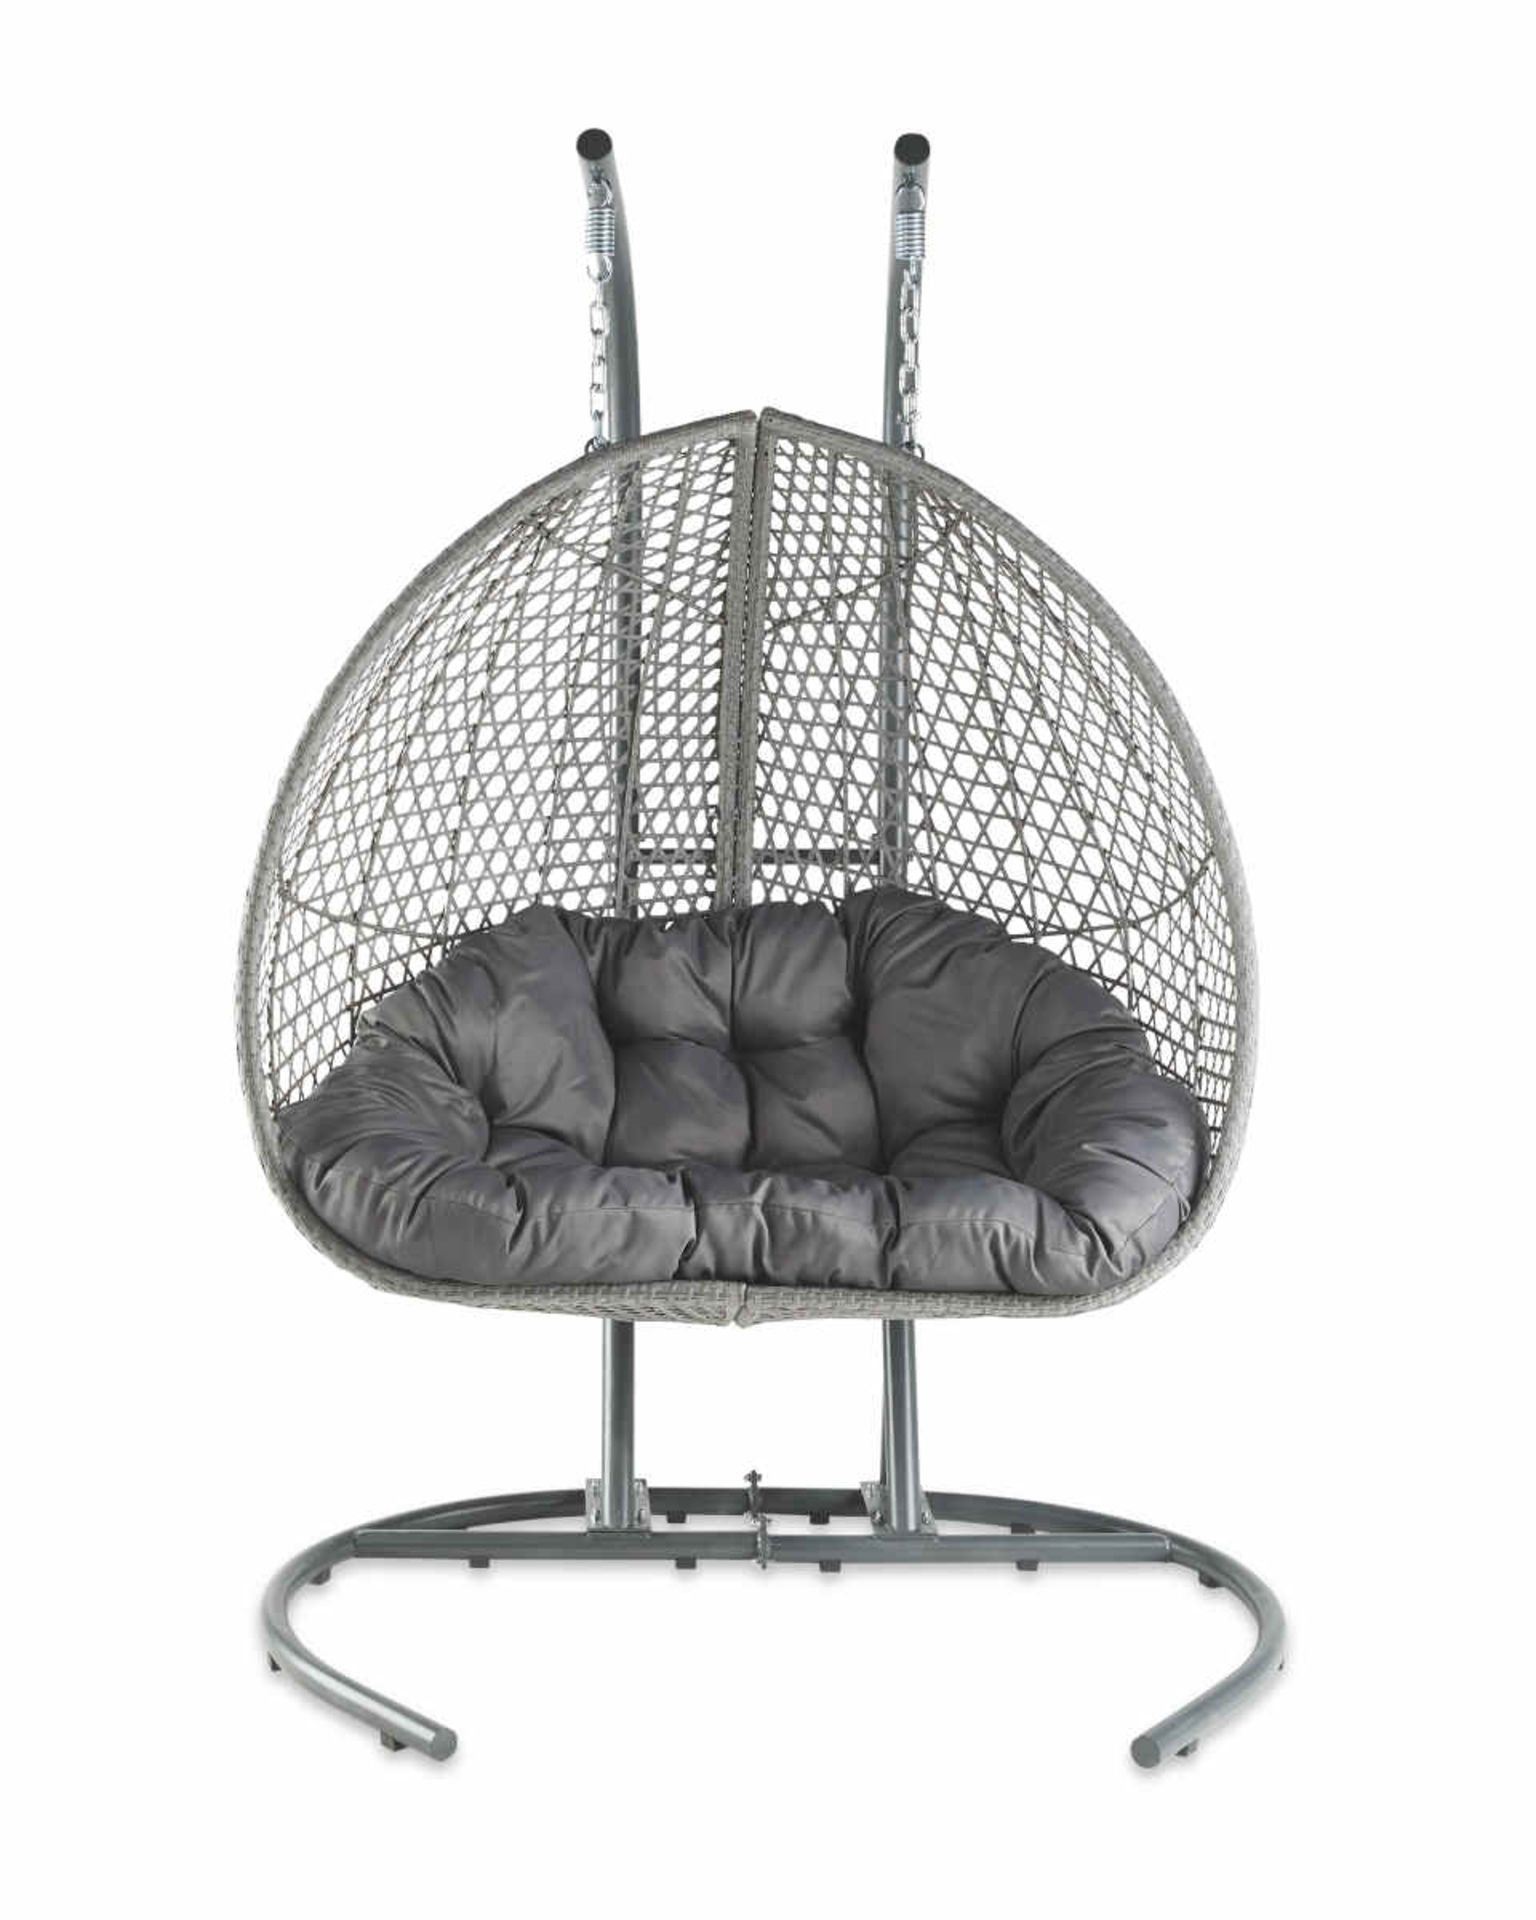 (2109832) Luxury Large Hanging Egg Chair